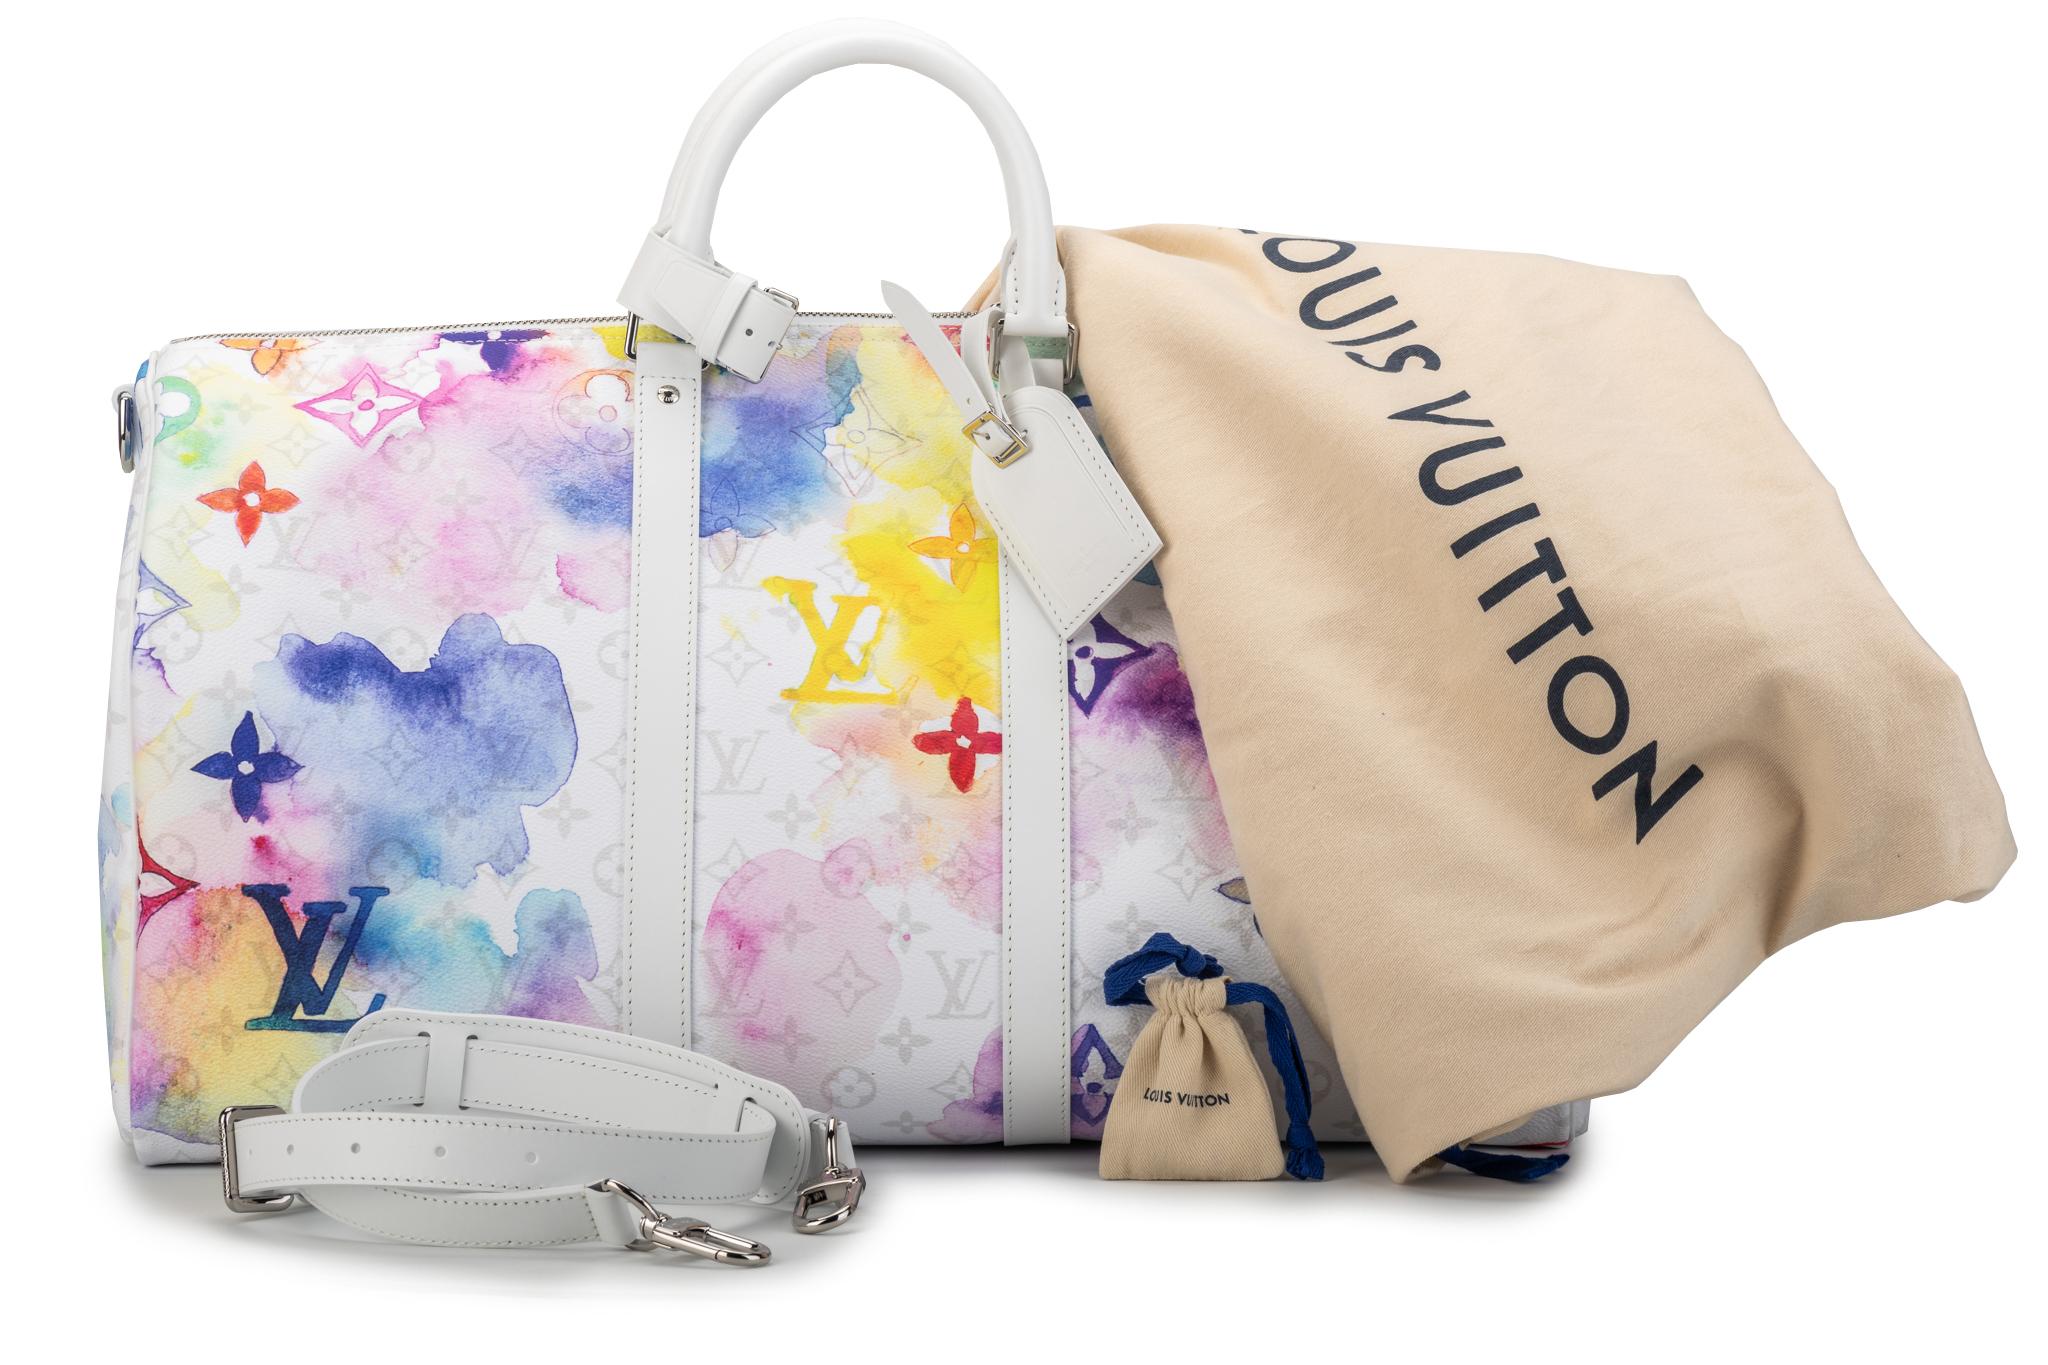 Louis Vuitton limited edition designed by Virgil Abloh, watercolor collection keepall 50. Detachable shoulder strap. Padlock, keys and luggage tag. Brand new with original dust bag and box.